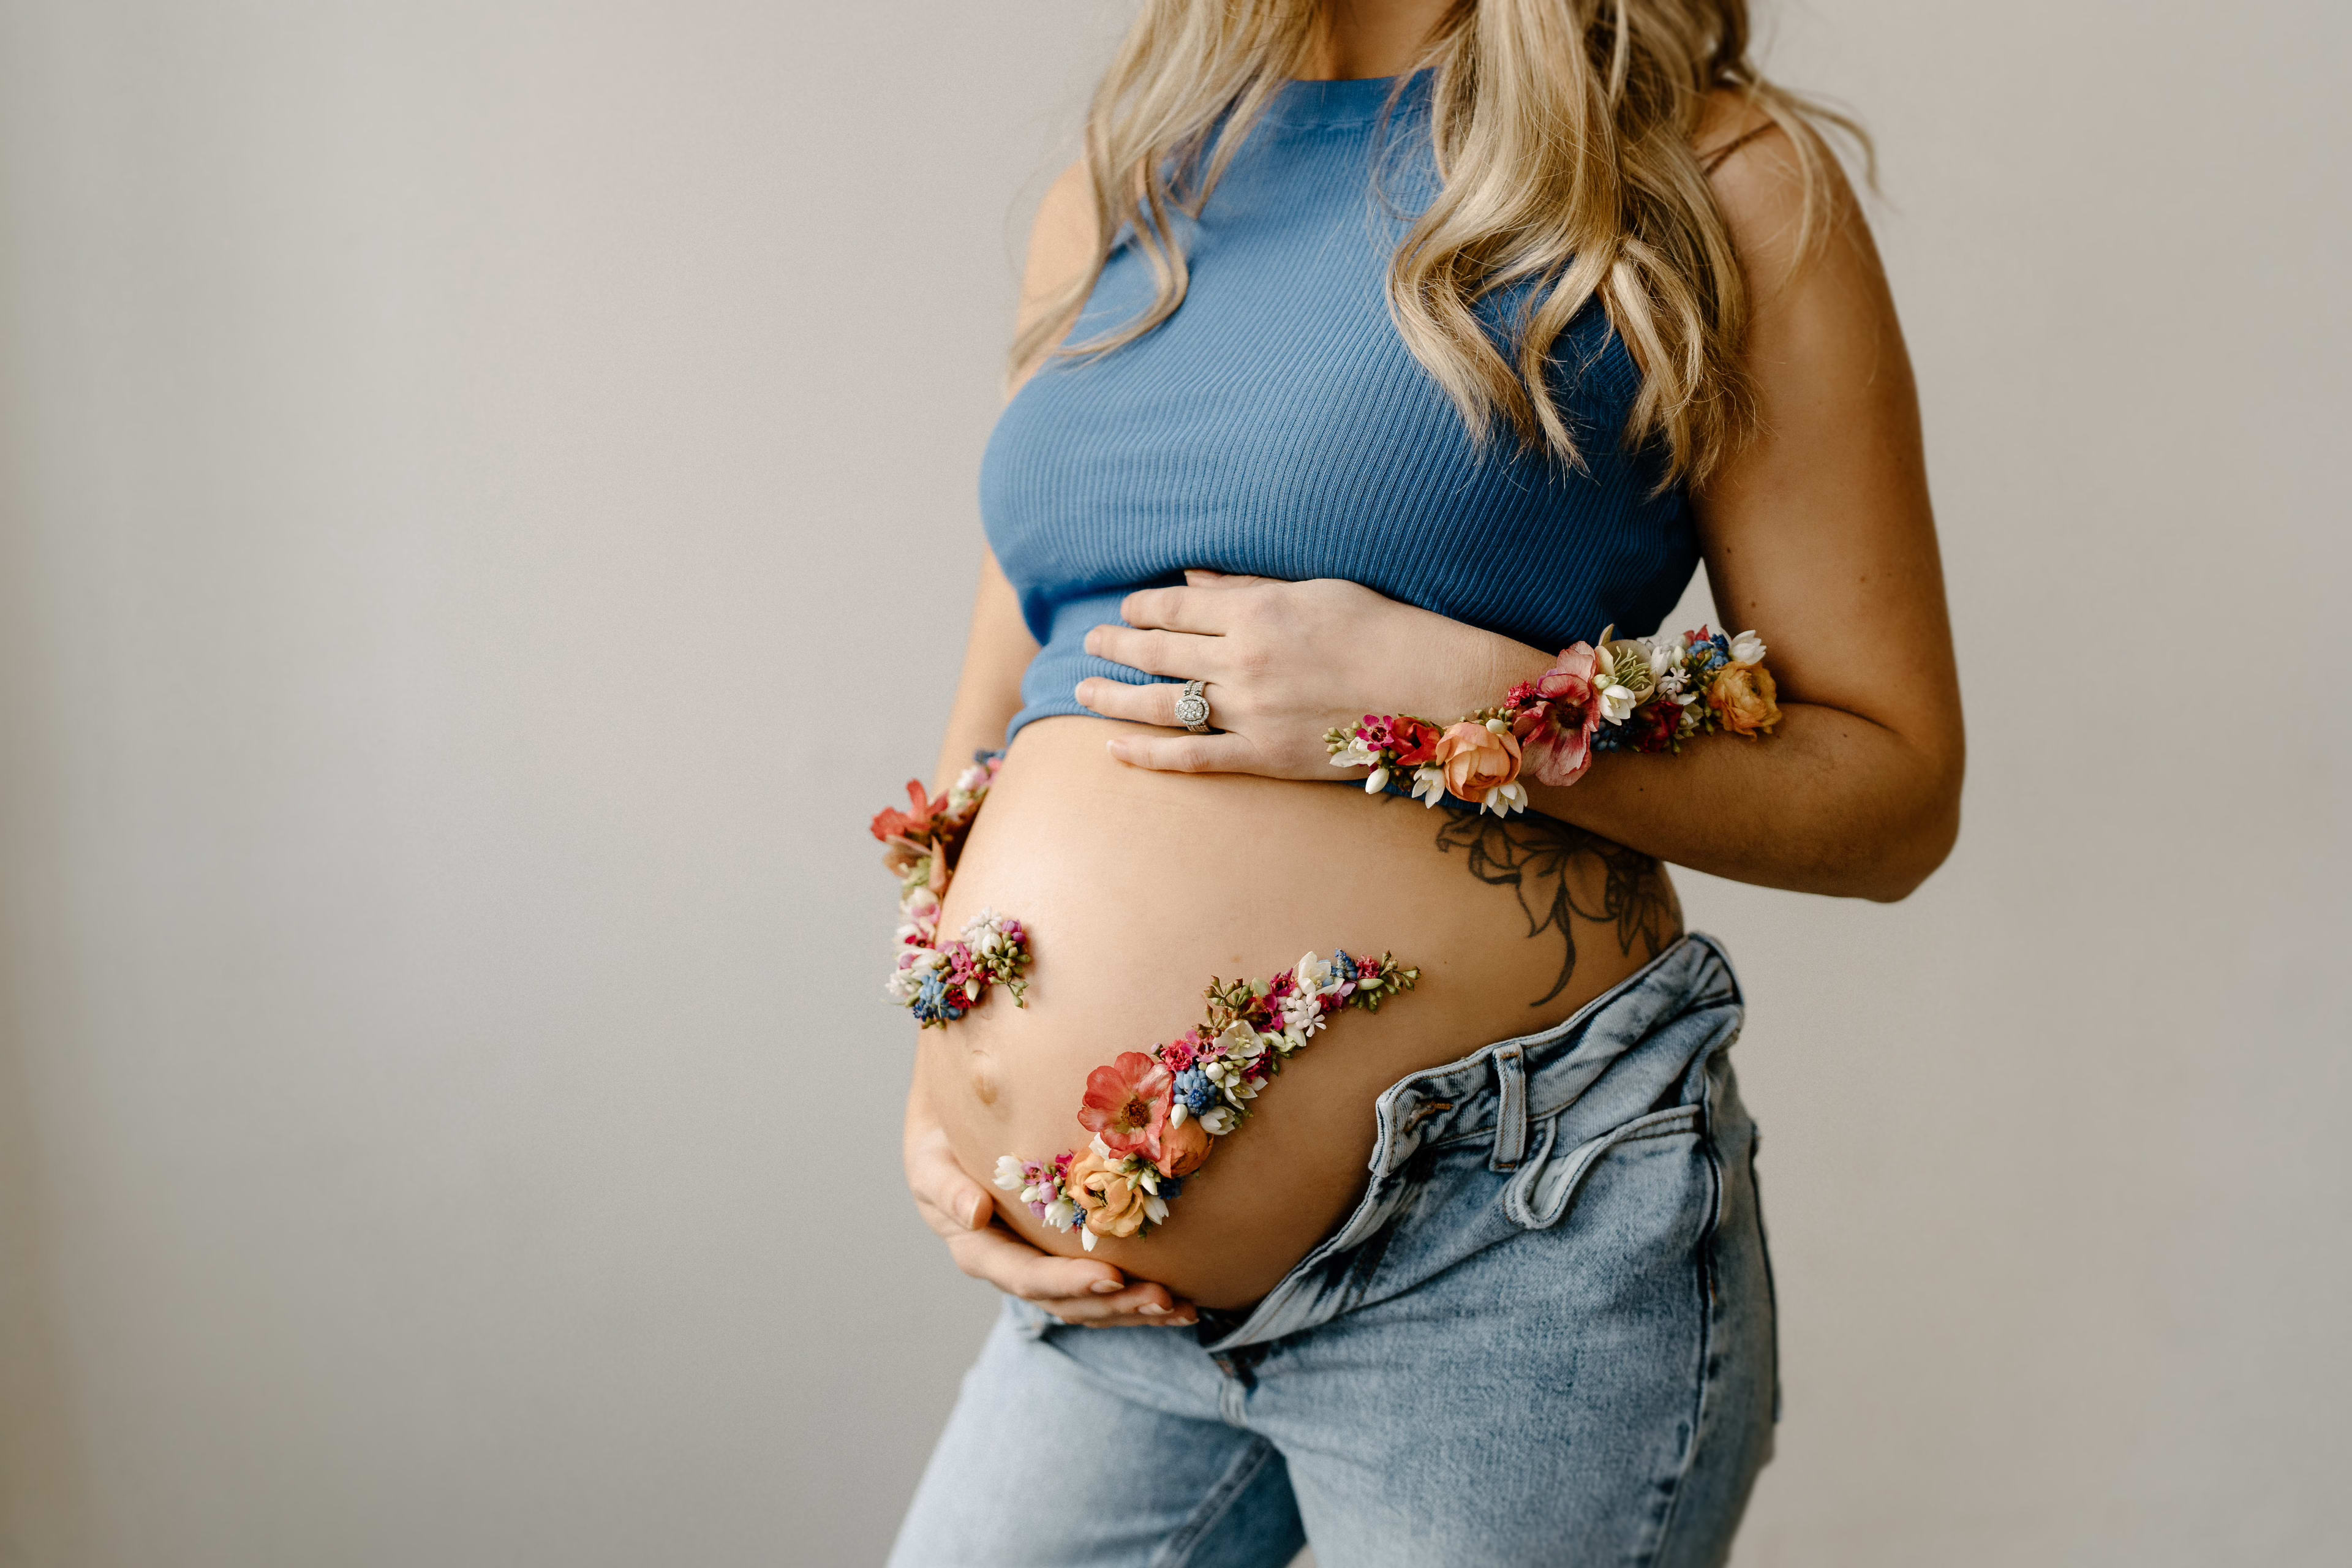 A spring maternity photoshoot featuring a pregnant woman in a blue top and jeans.